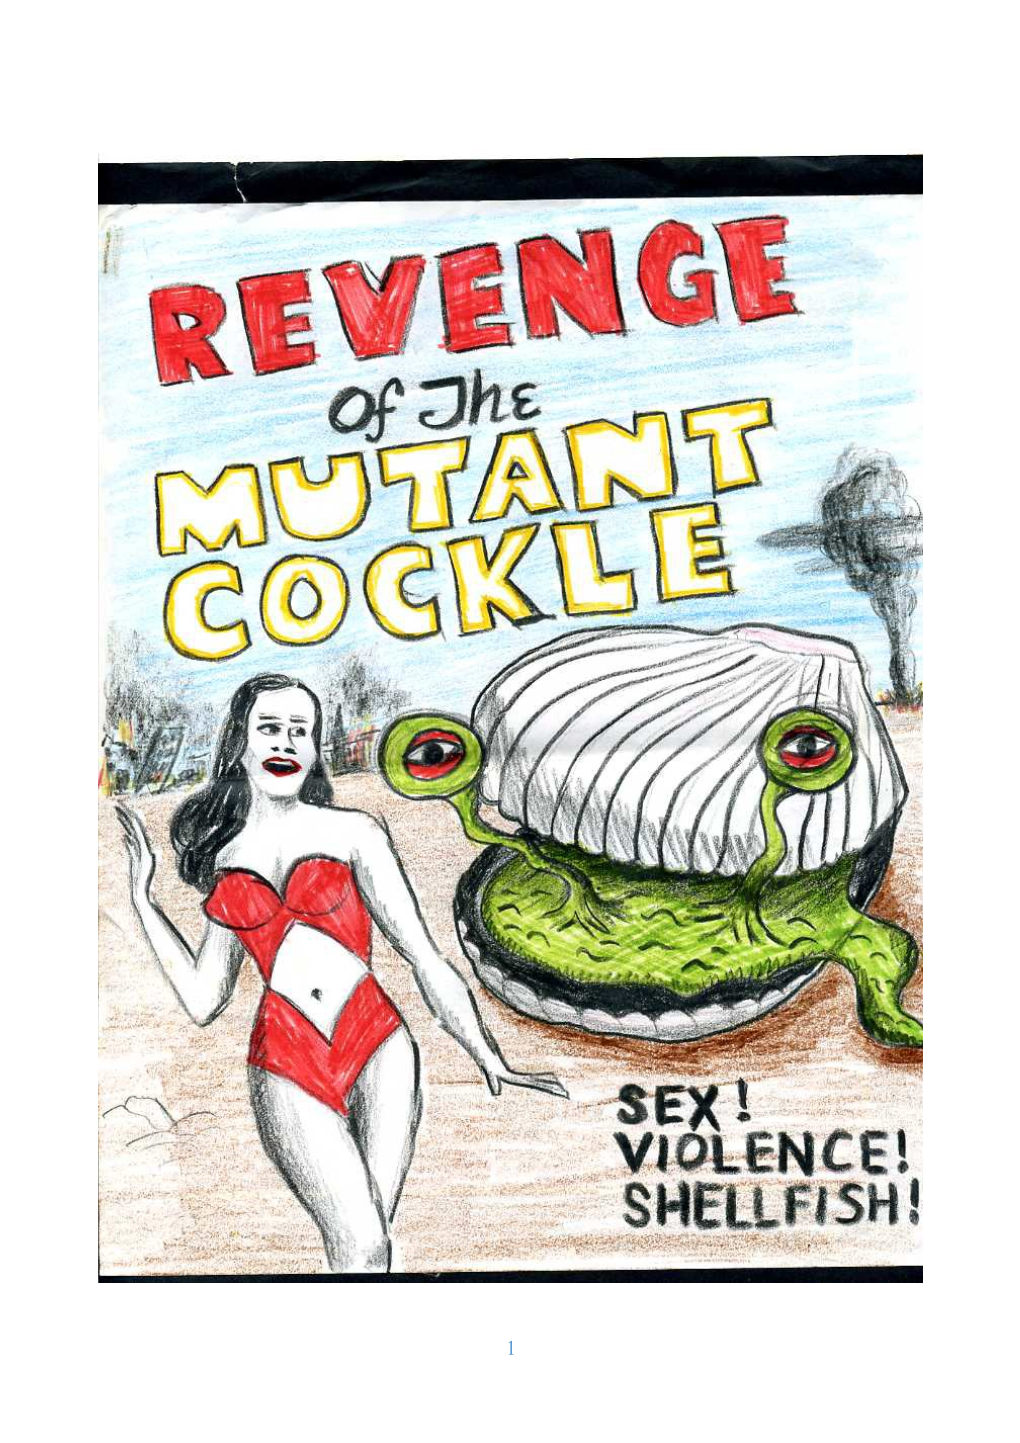 Revenge of the Mutant Cockle